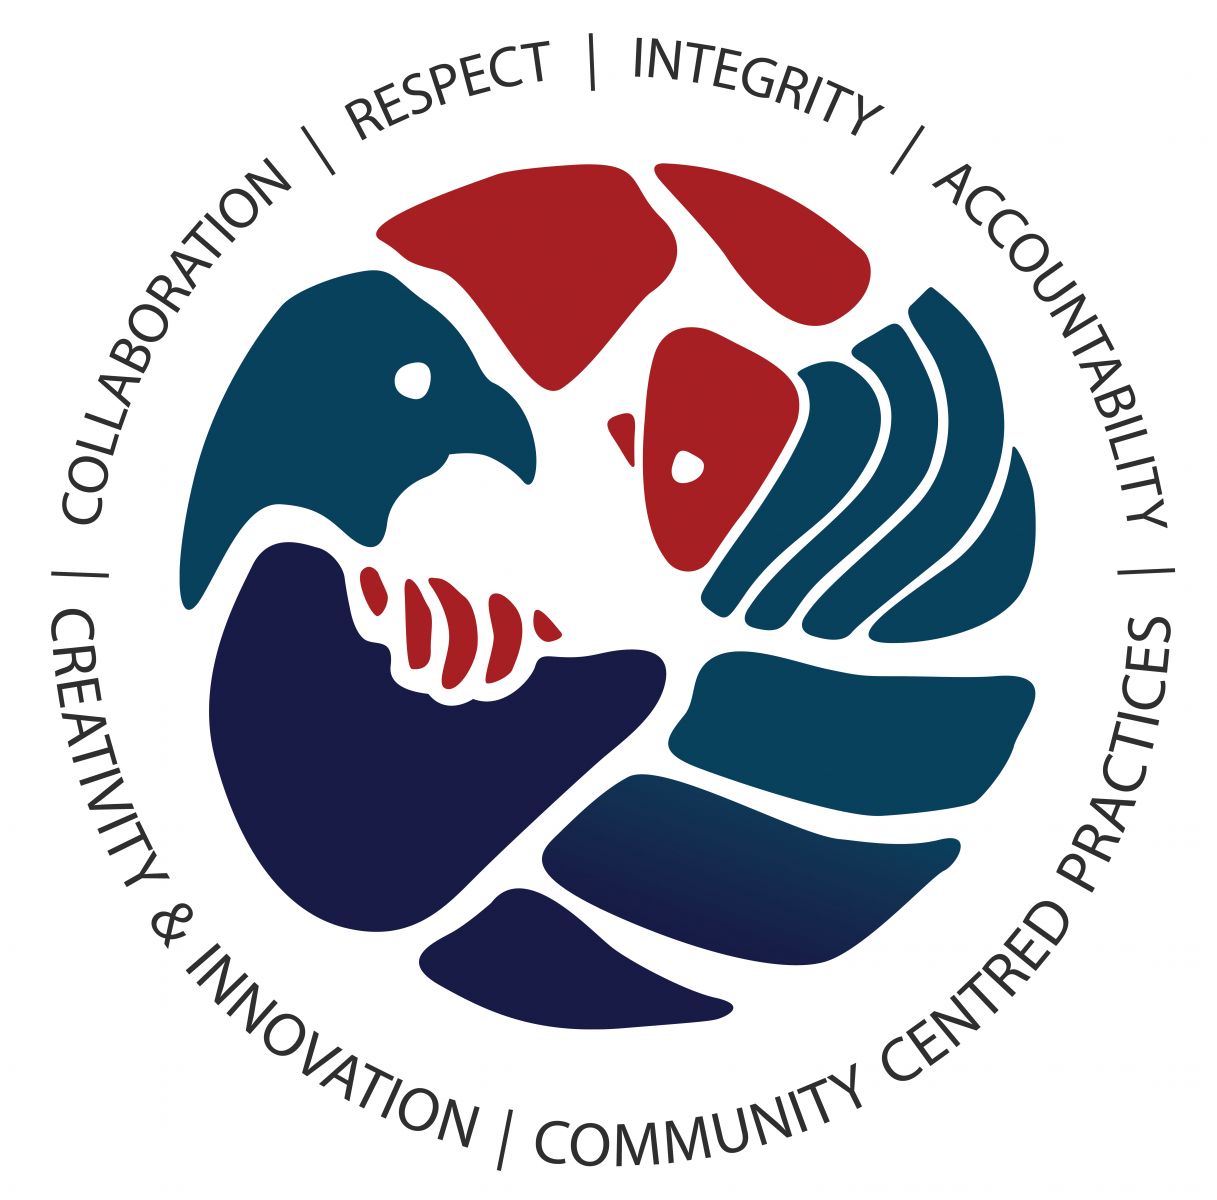 Two figures (a bird and women) cradle each other forming a complete circle. The core values are listed around the logo.